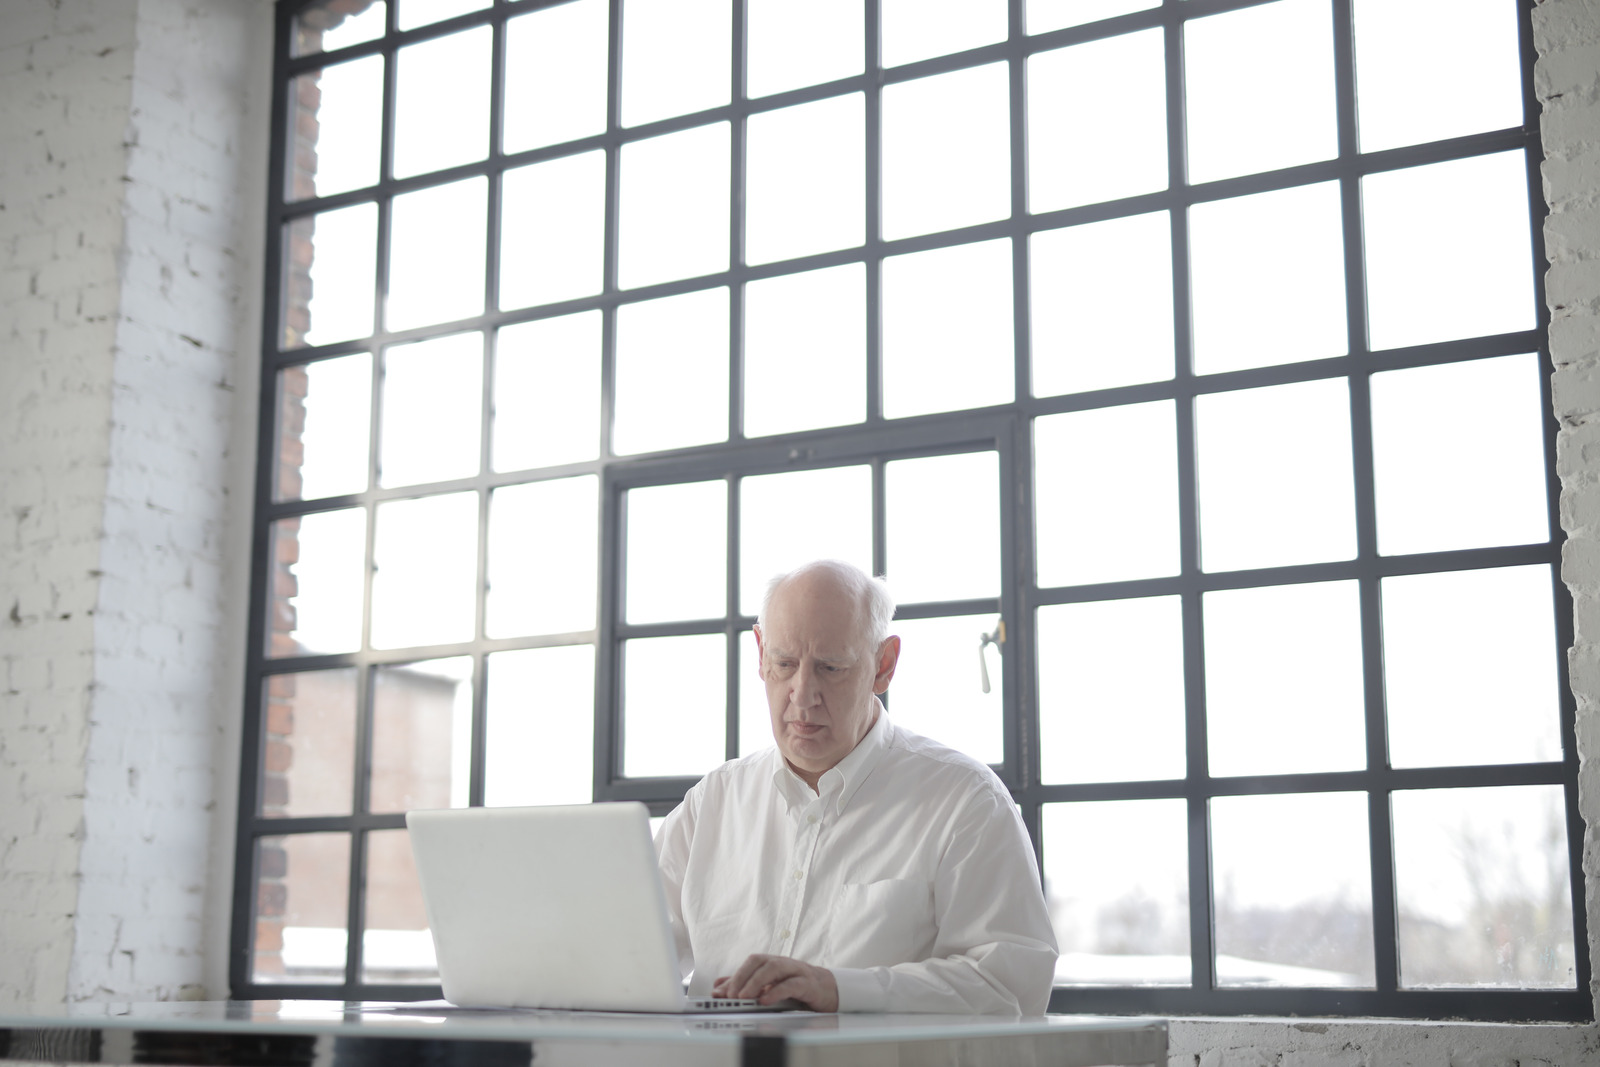 Canva – Man in White Shirt Sitting by the Table Using Macbook